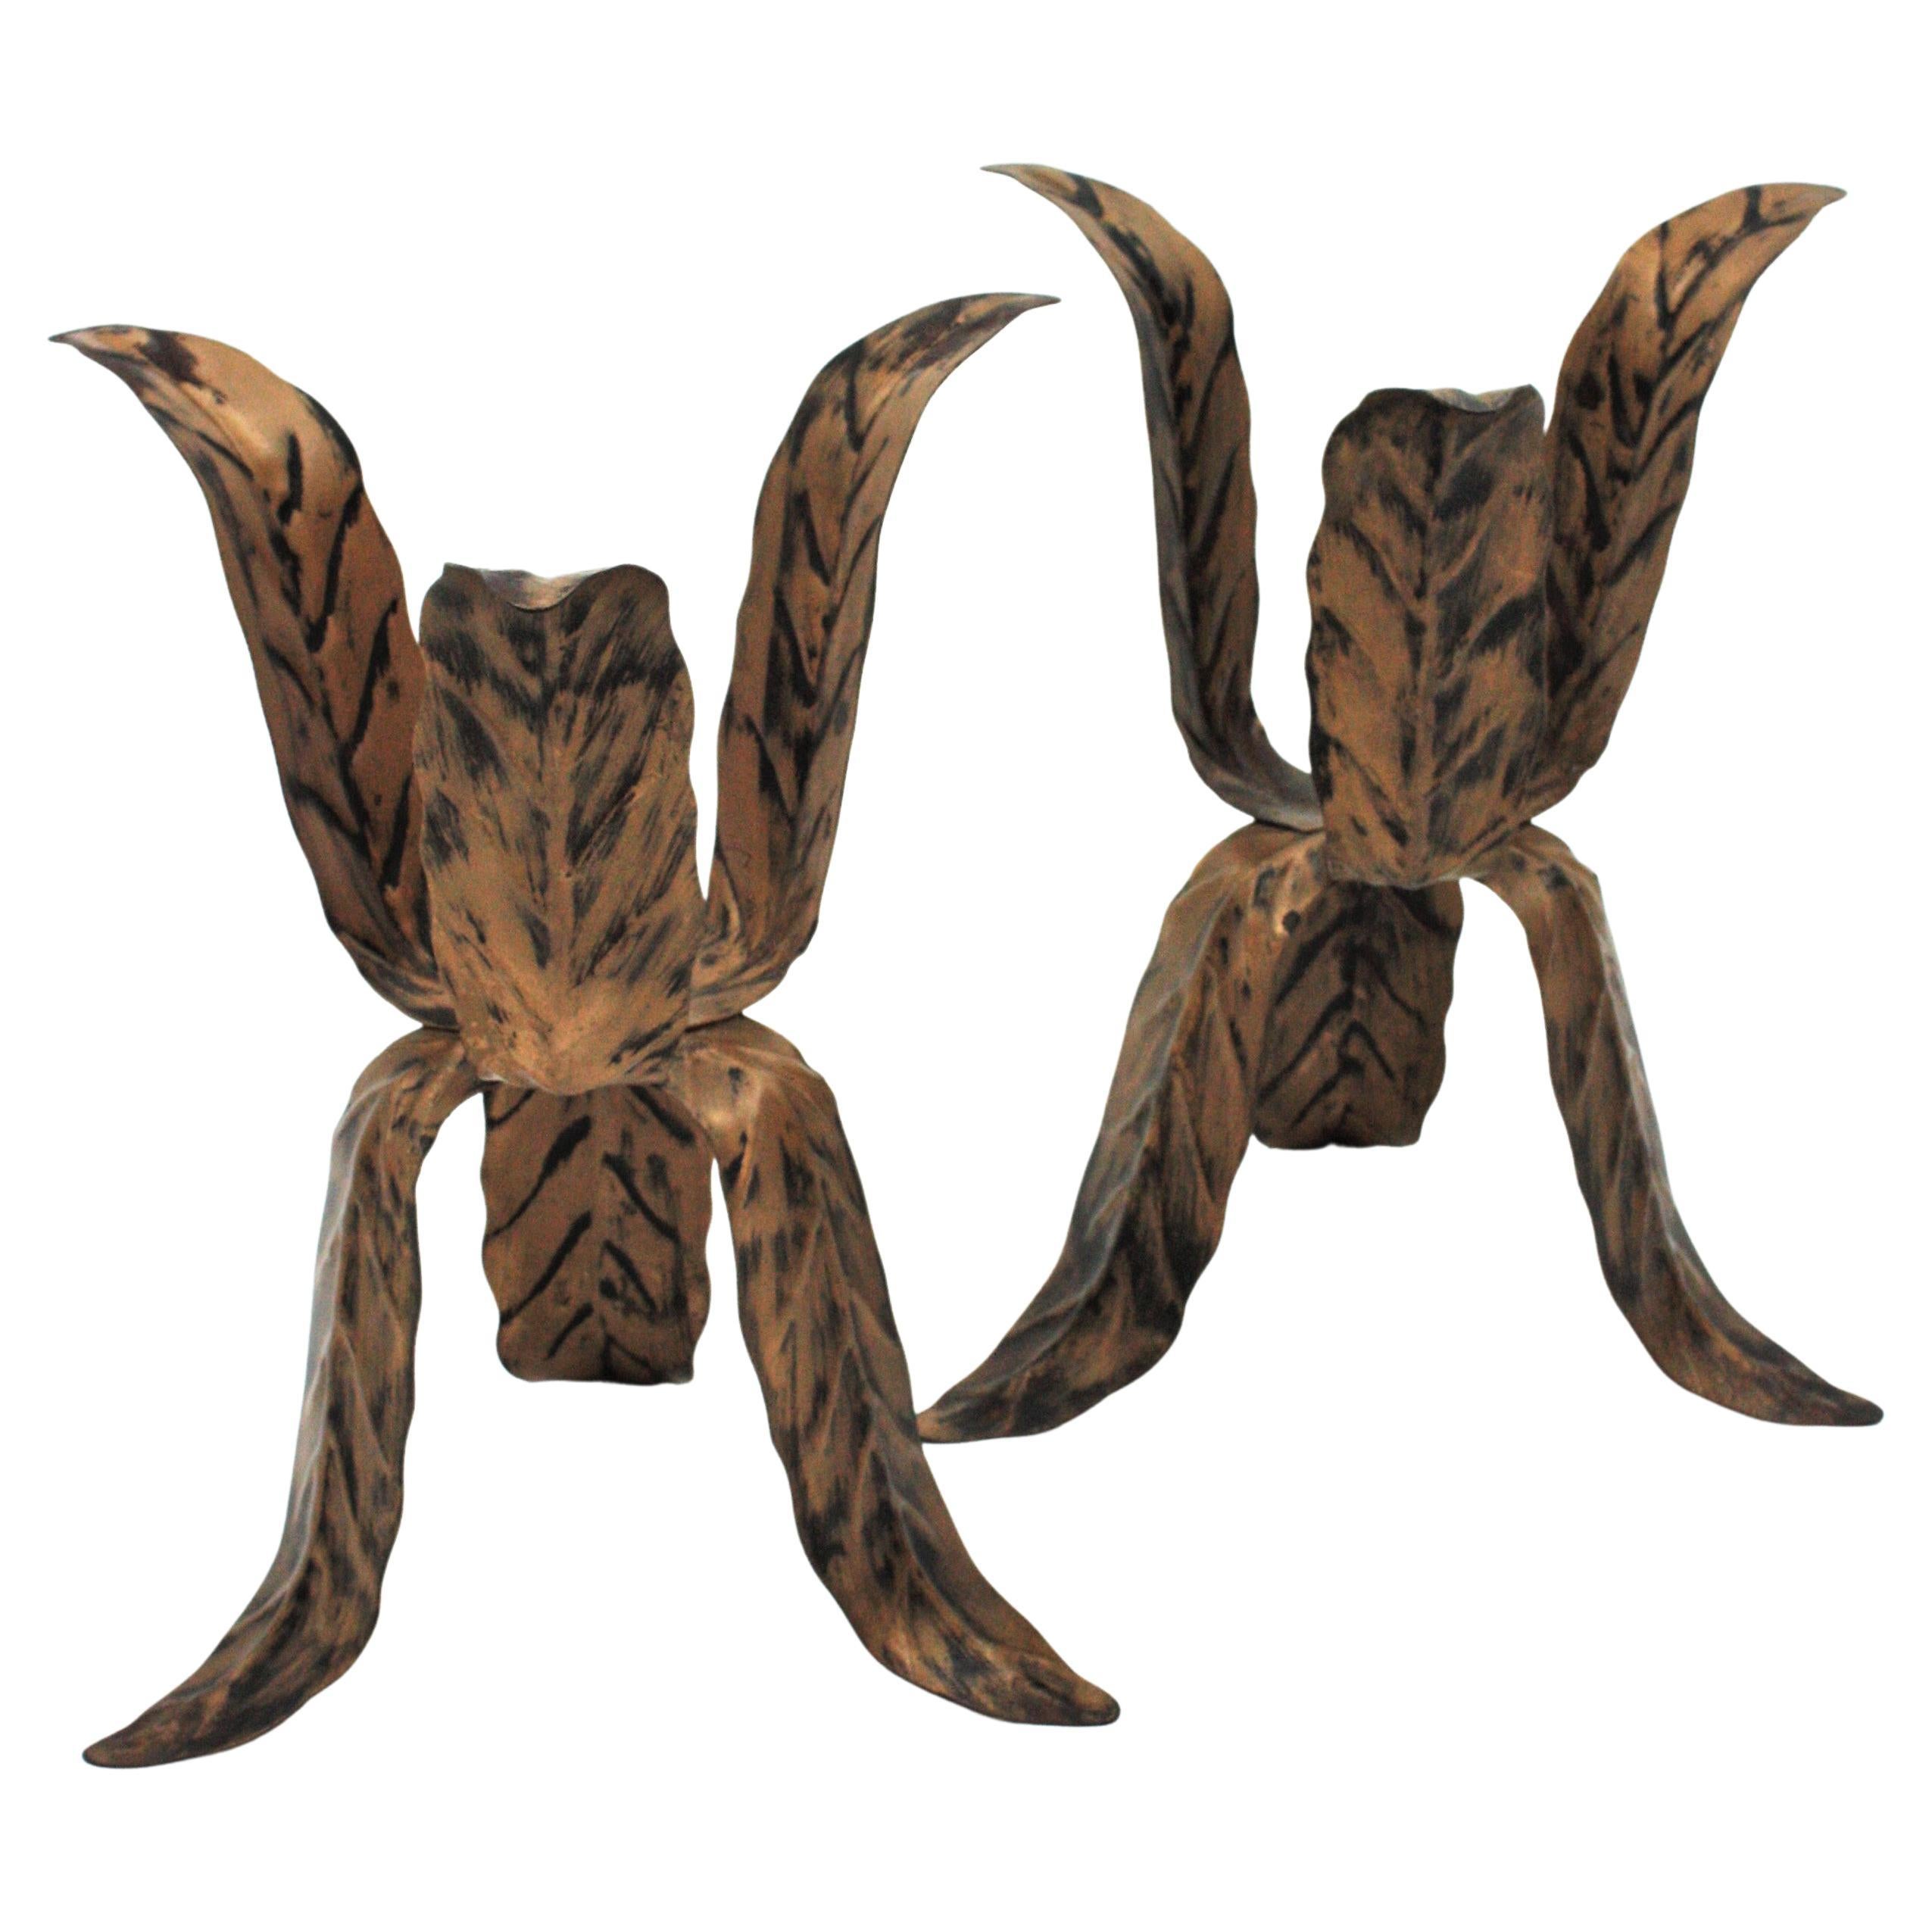 Pair of Leaf Design Tripod Plant Stands or Jardinières in Gilt Patinated Metal